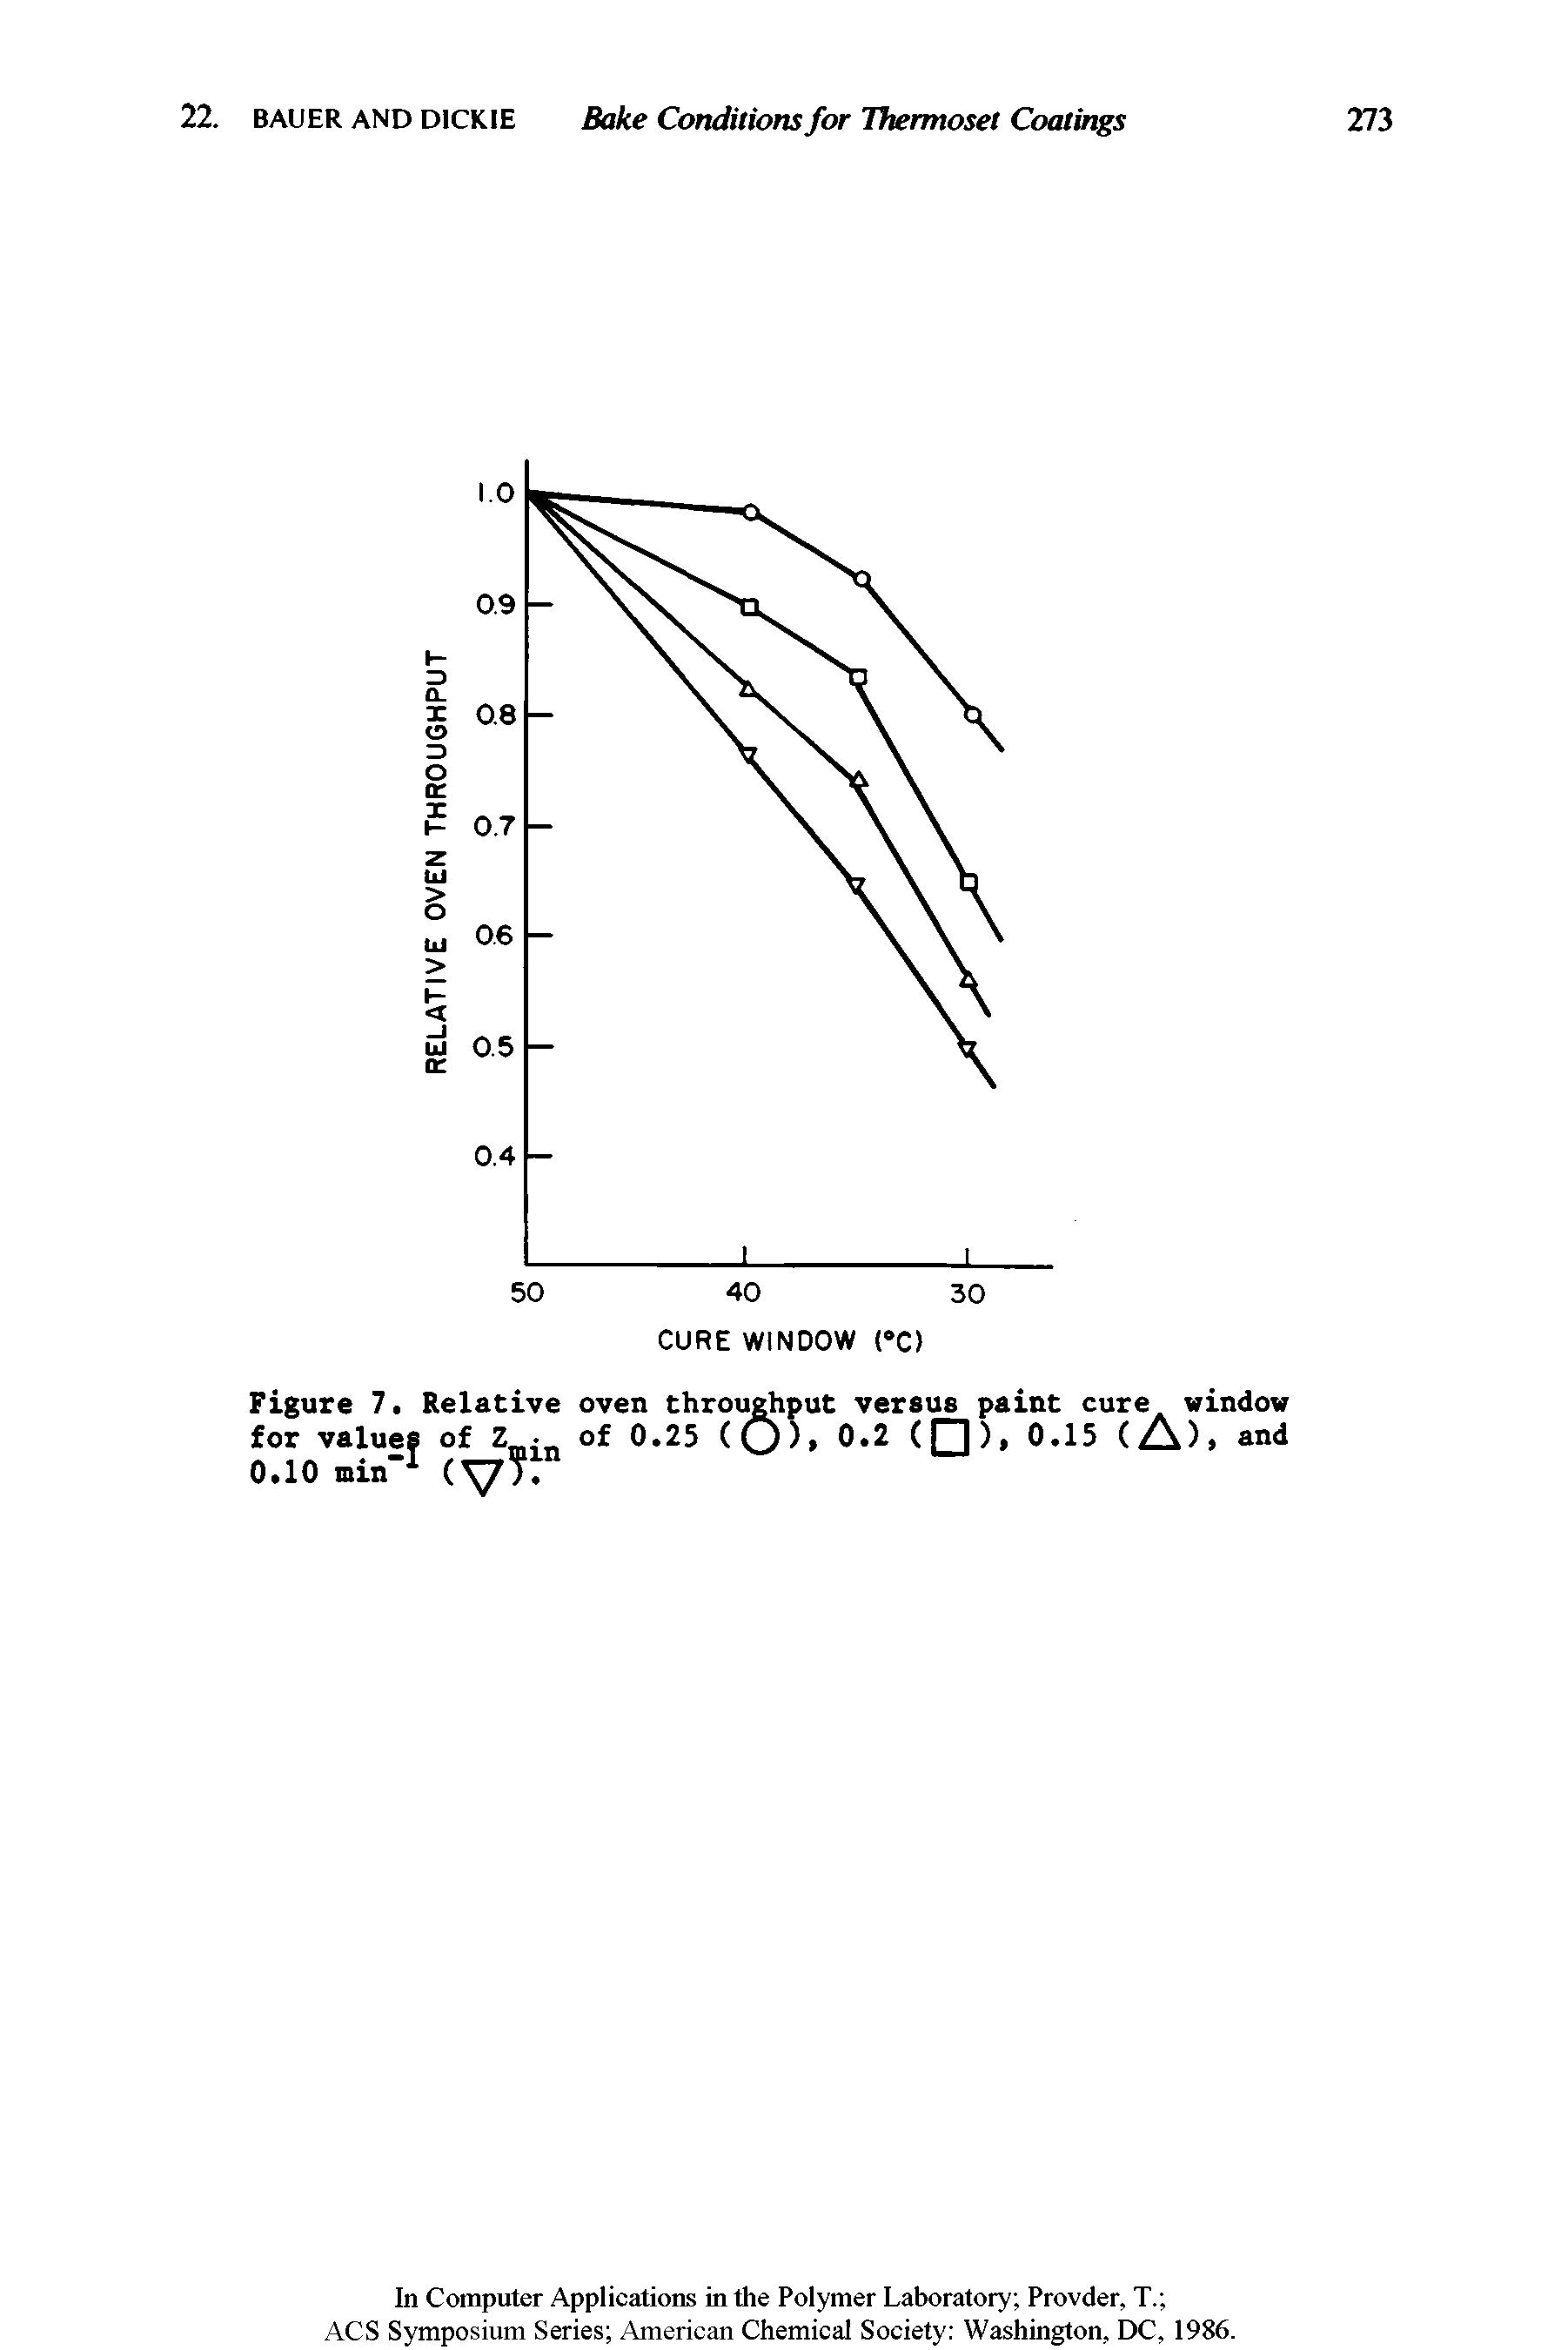 Figure 7. Relative oven throughput versus paint cure window for values of Z -n of 0.25 (Q), 0 2 (C]) 0 15 (A), and 0.10 min-1 ( 7.